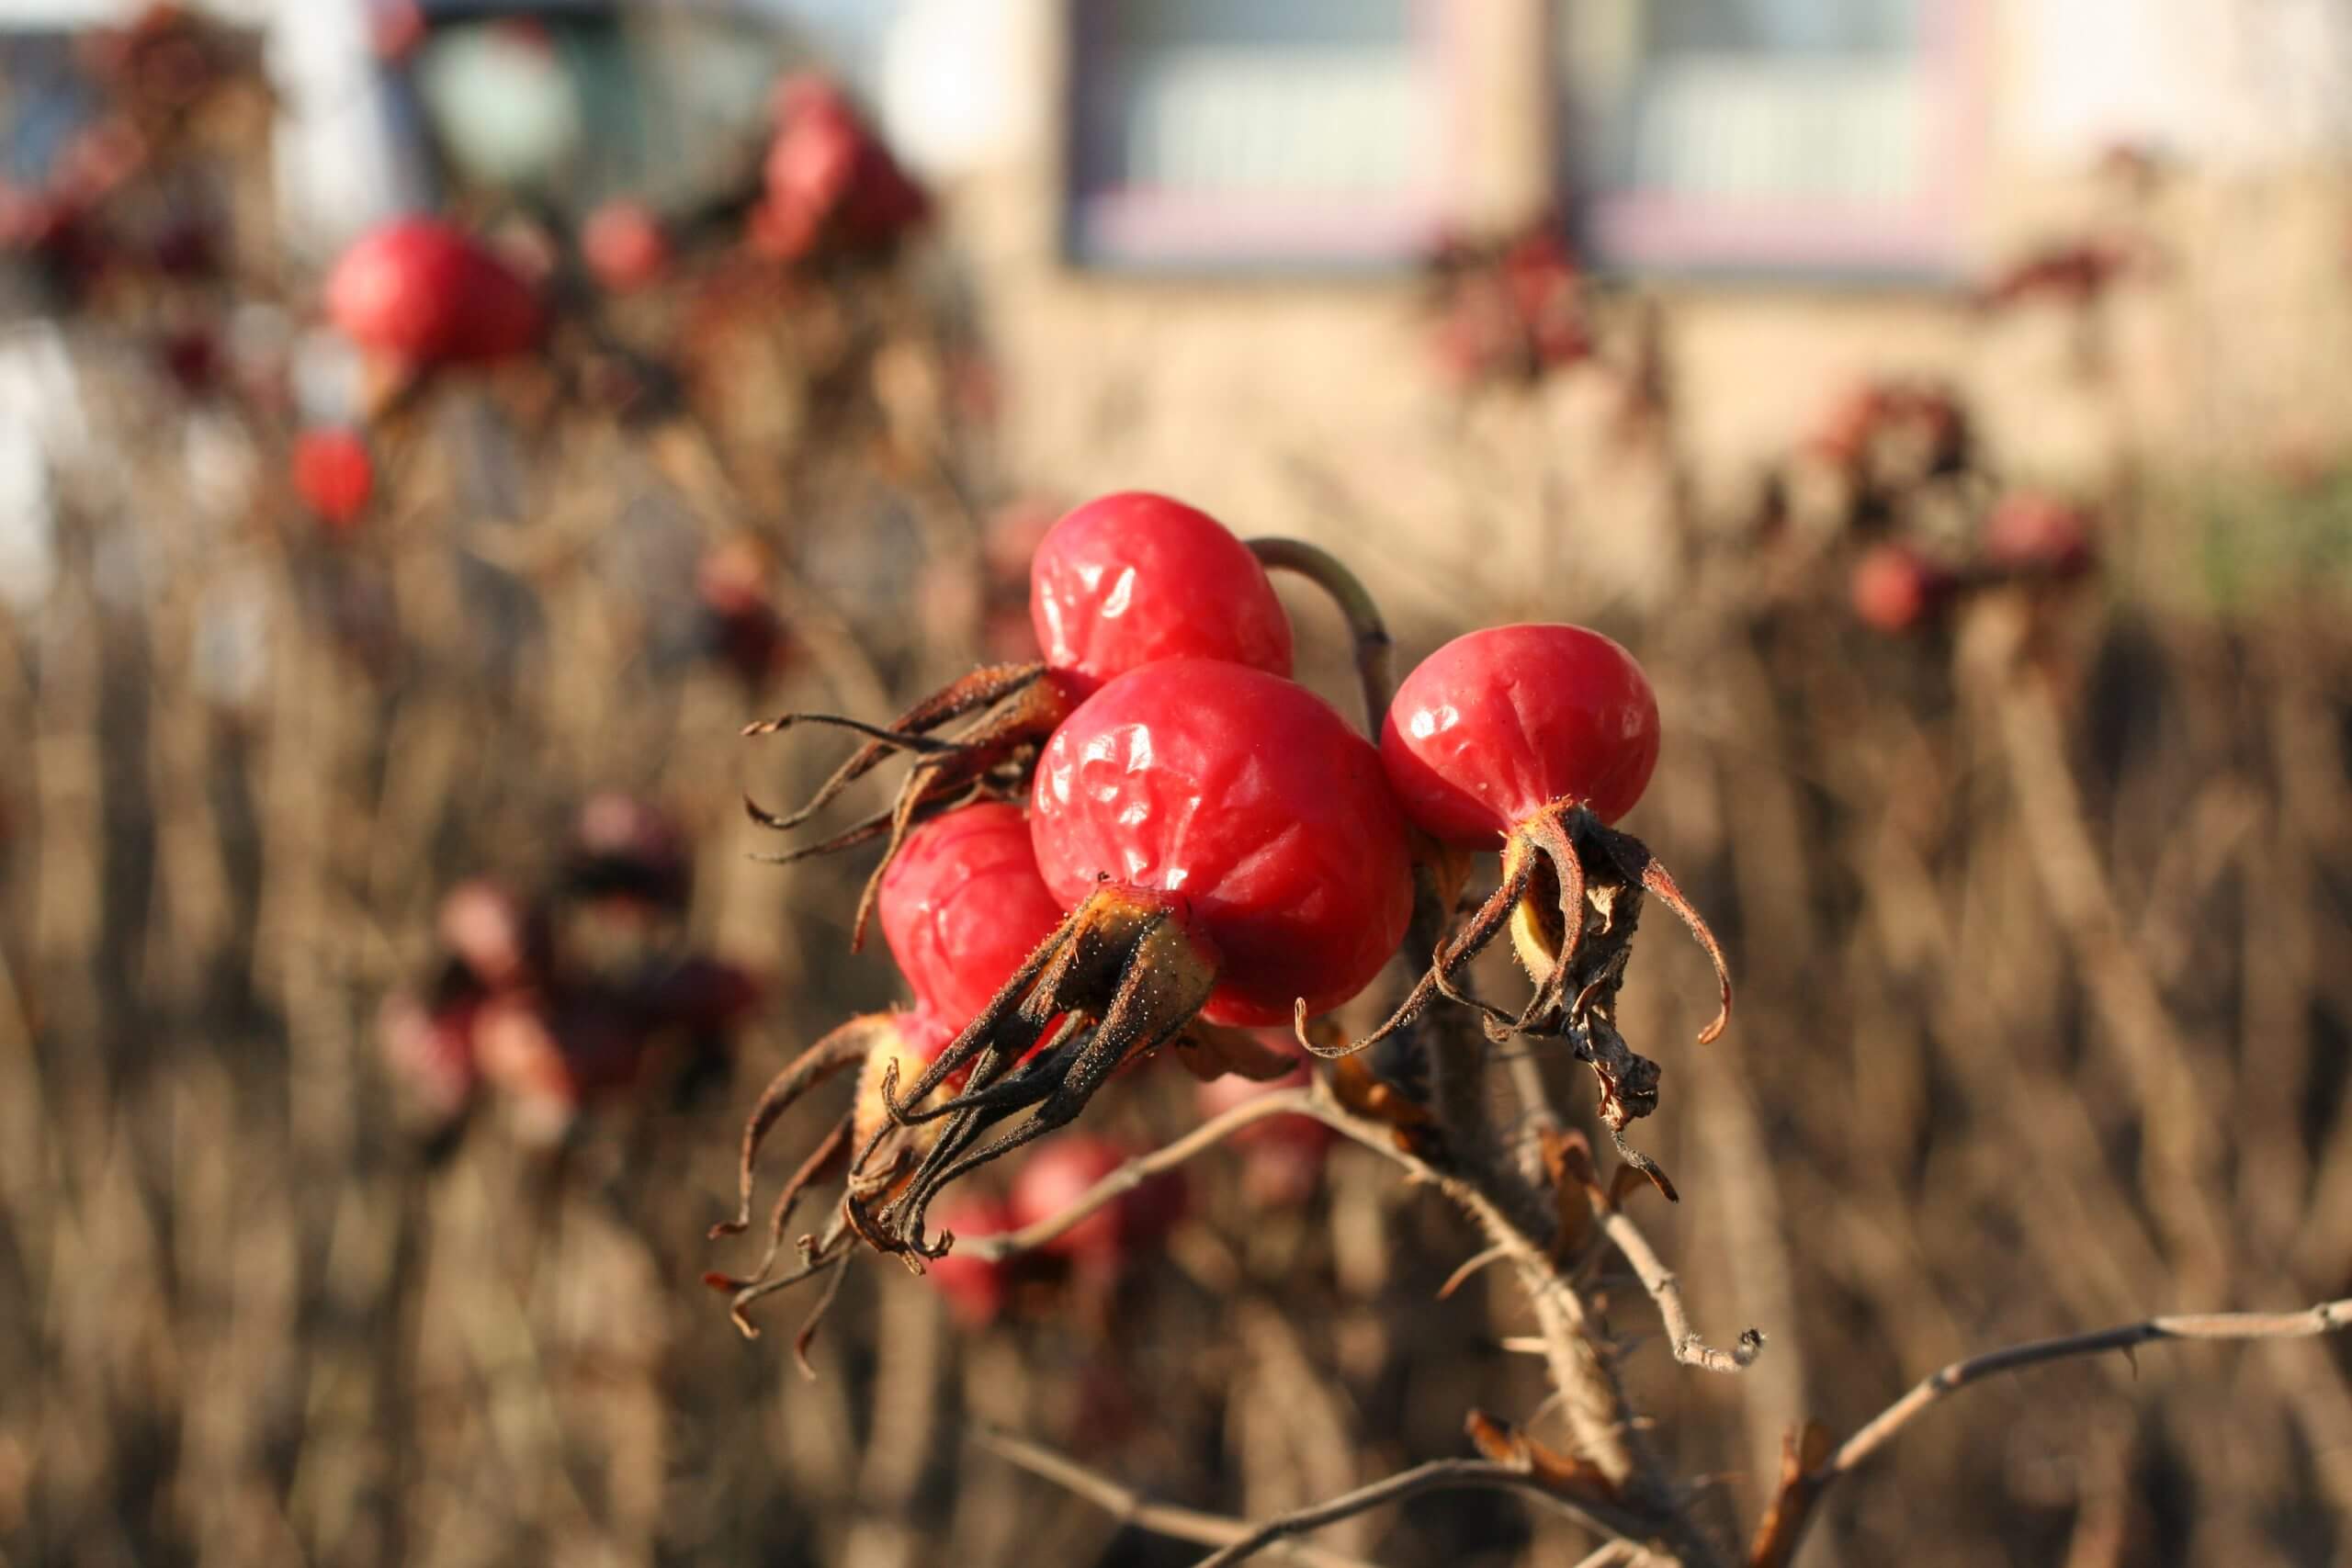 Rugosa hips continue to look pretty into winter until they are consumed by wildlife.